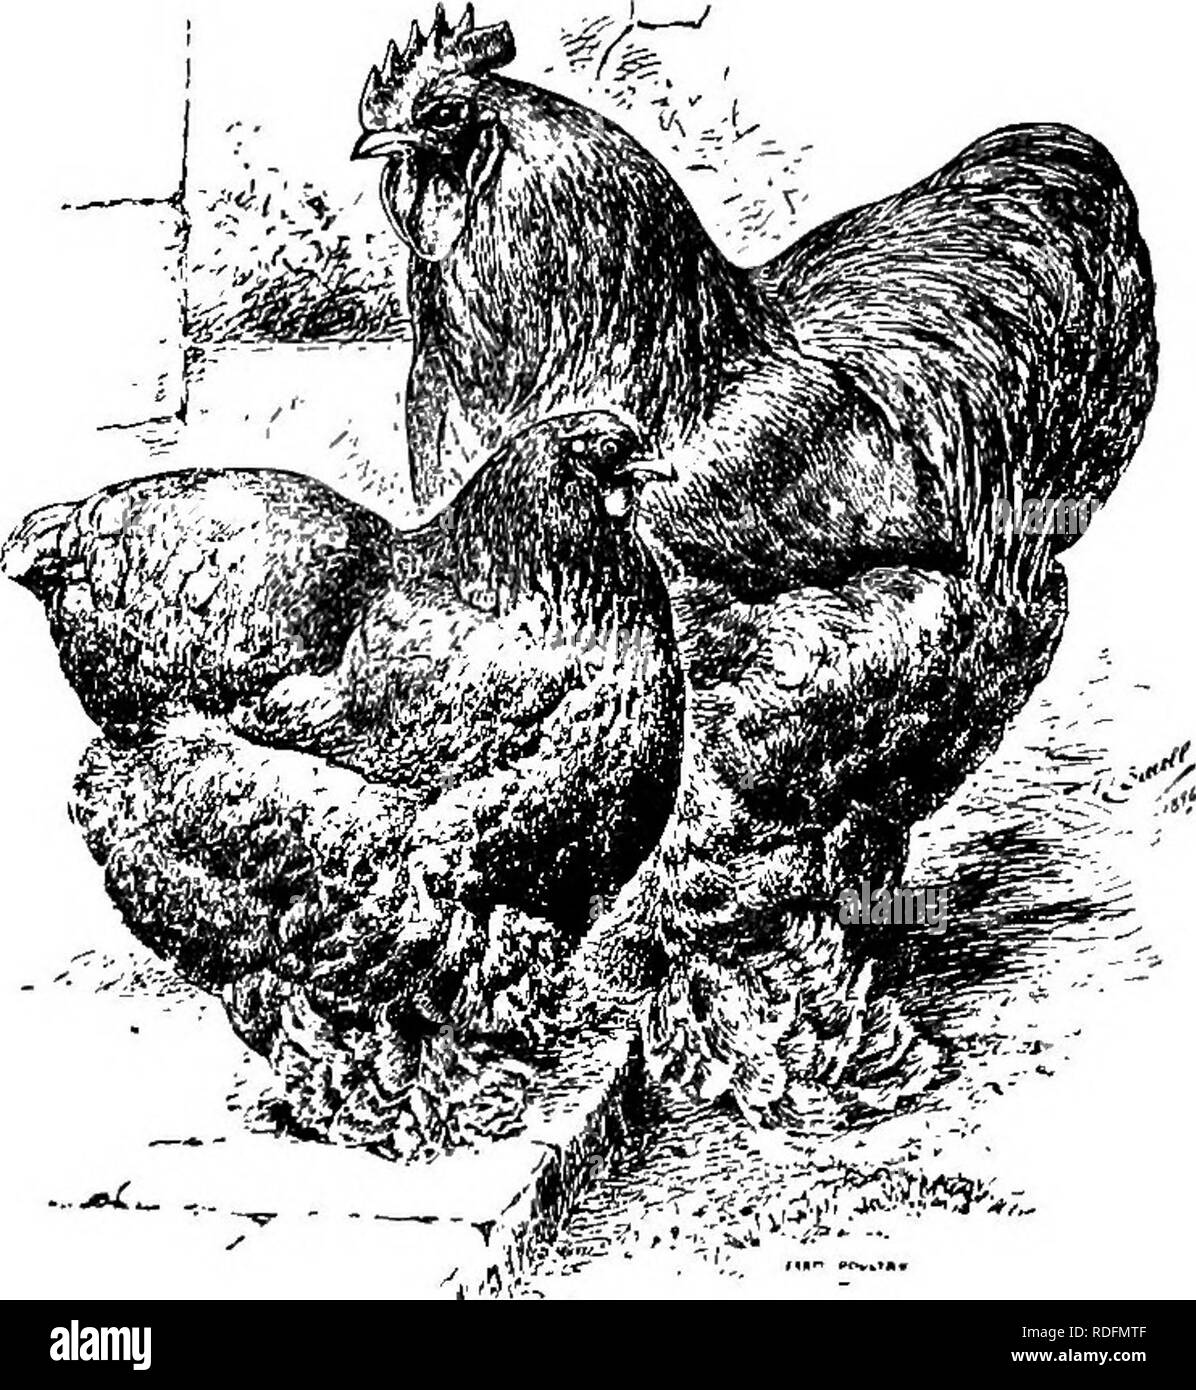 Poultry-craft. A text-book for poultry keepers ... Poultry. 7° PO UL TR r-  CRAFT hen 8j^ lbs., pullet 7 lbs., the same as for Buff, Partridge and  White Cochins. In color